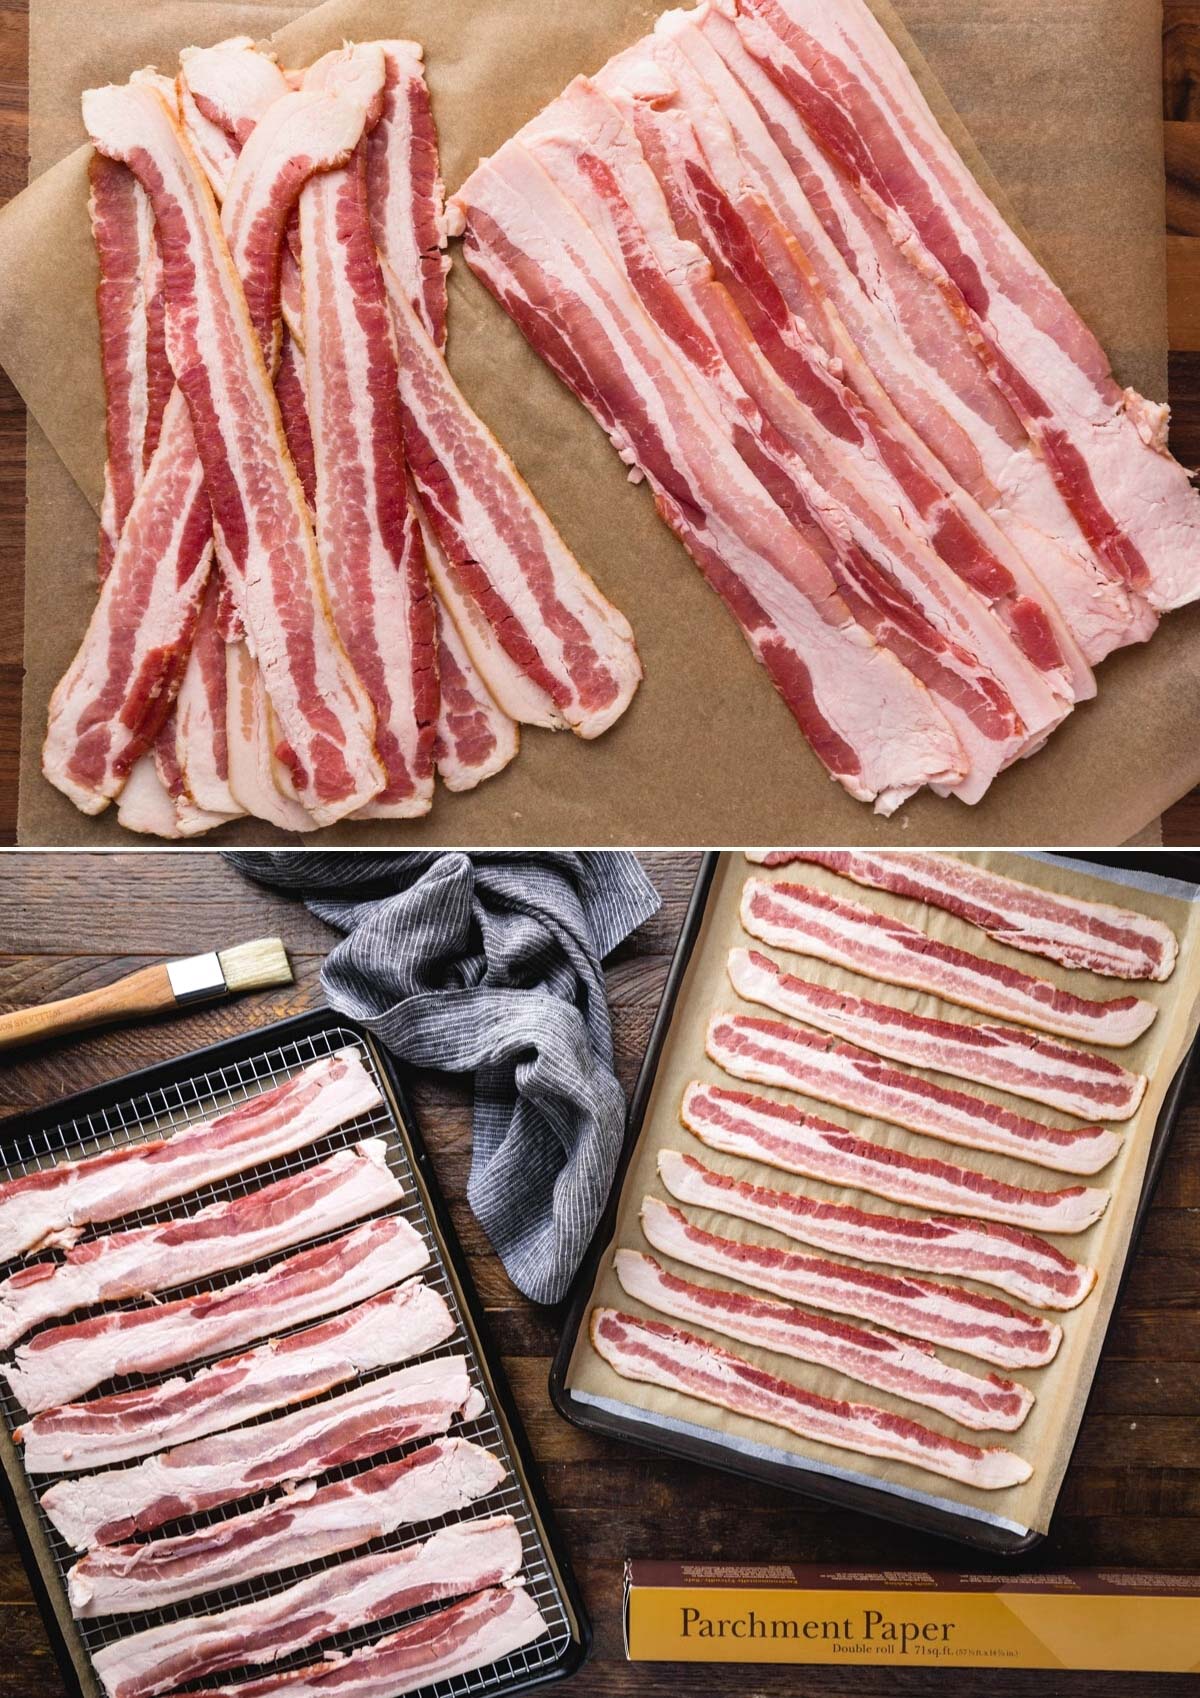 two photos of bacon on parchment paper and on baking sheets showing how to cook bacon in the oven